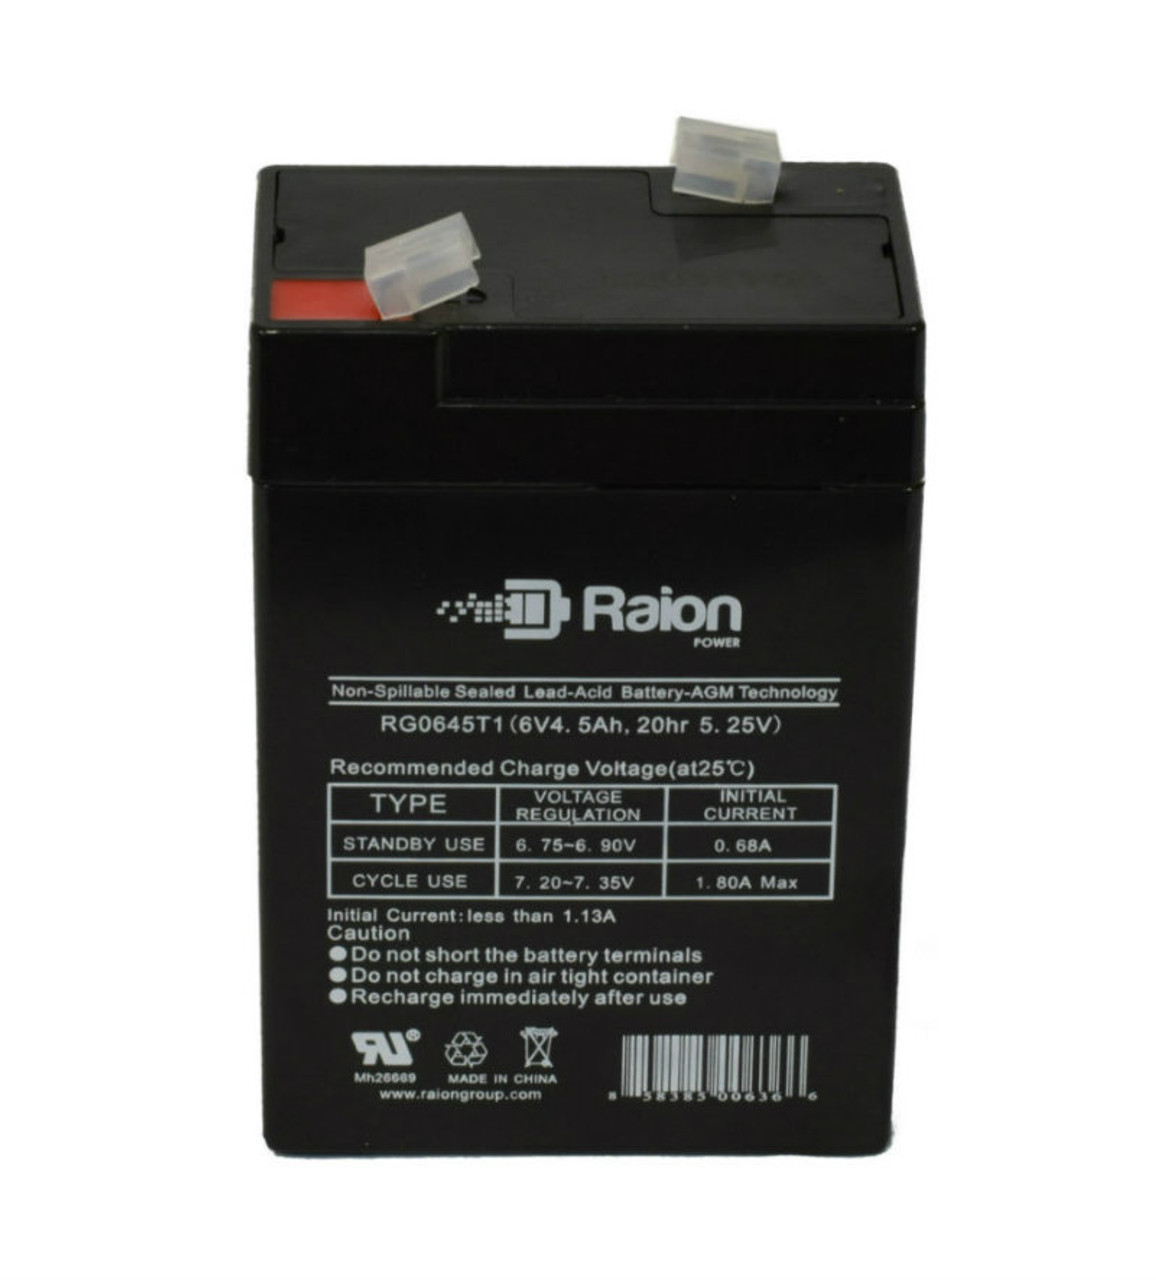 Raion Power RG0645T1 Replacement Battery Cartridge for Dual-Lite HCXURBRC12